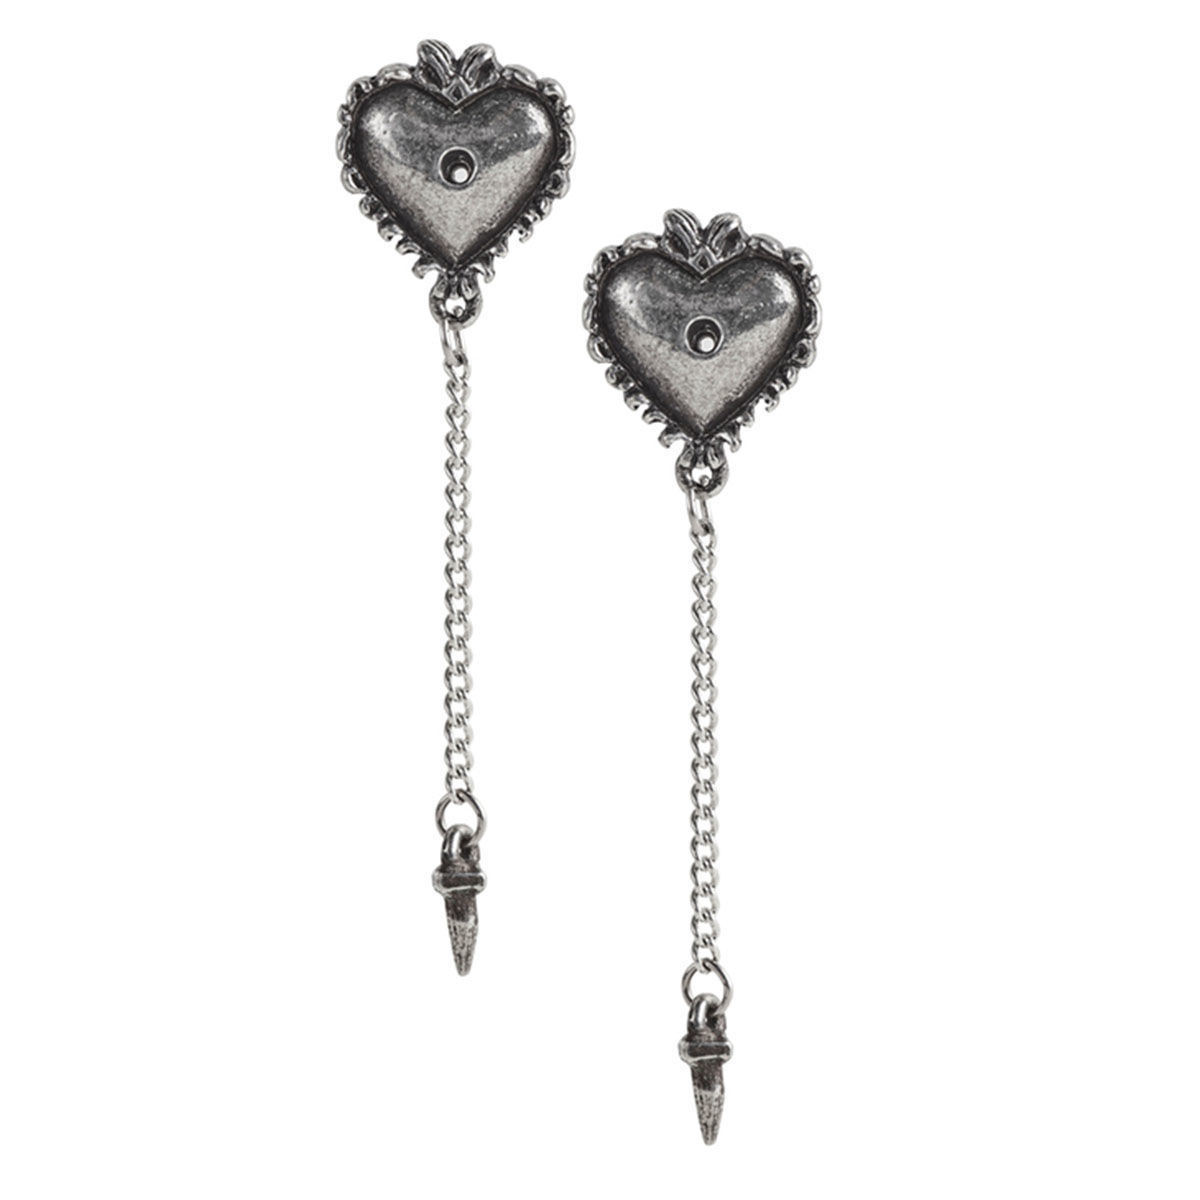 Alchemy Pewter Witches Heart Studs - MuseumReplicas.com